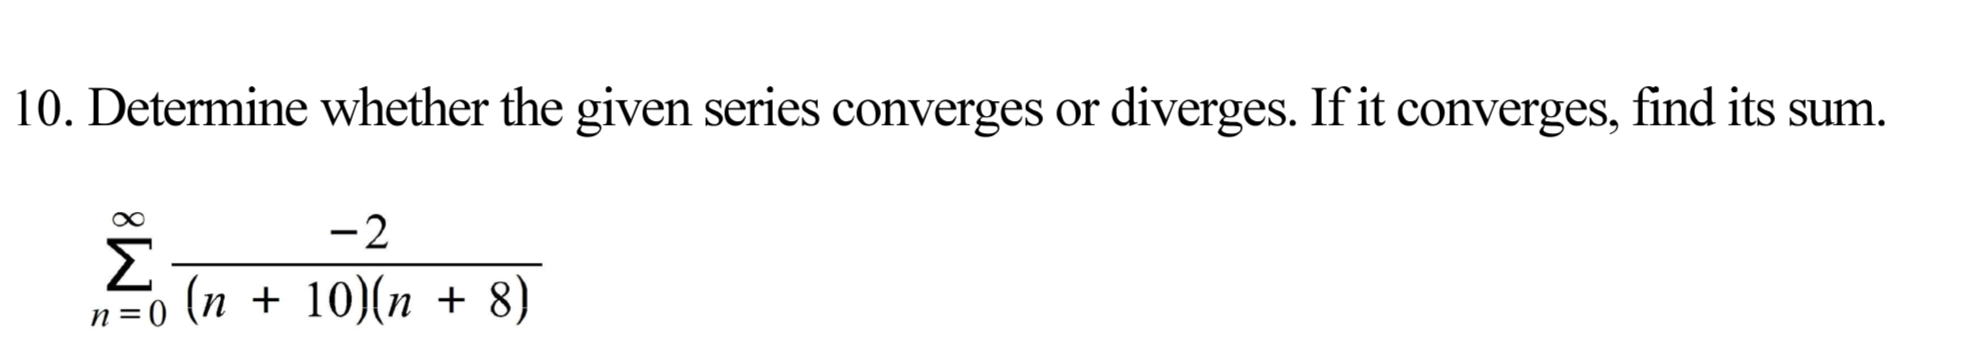 10. Determine whether the given series converges or diverges. If it converges, find its sum.
-2
n=0 (n + 10)(n + 8)
